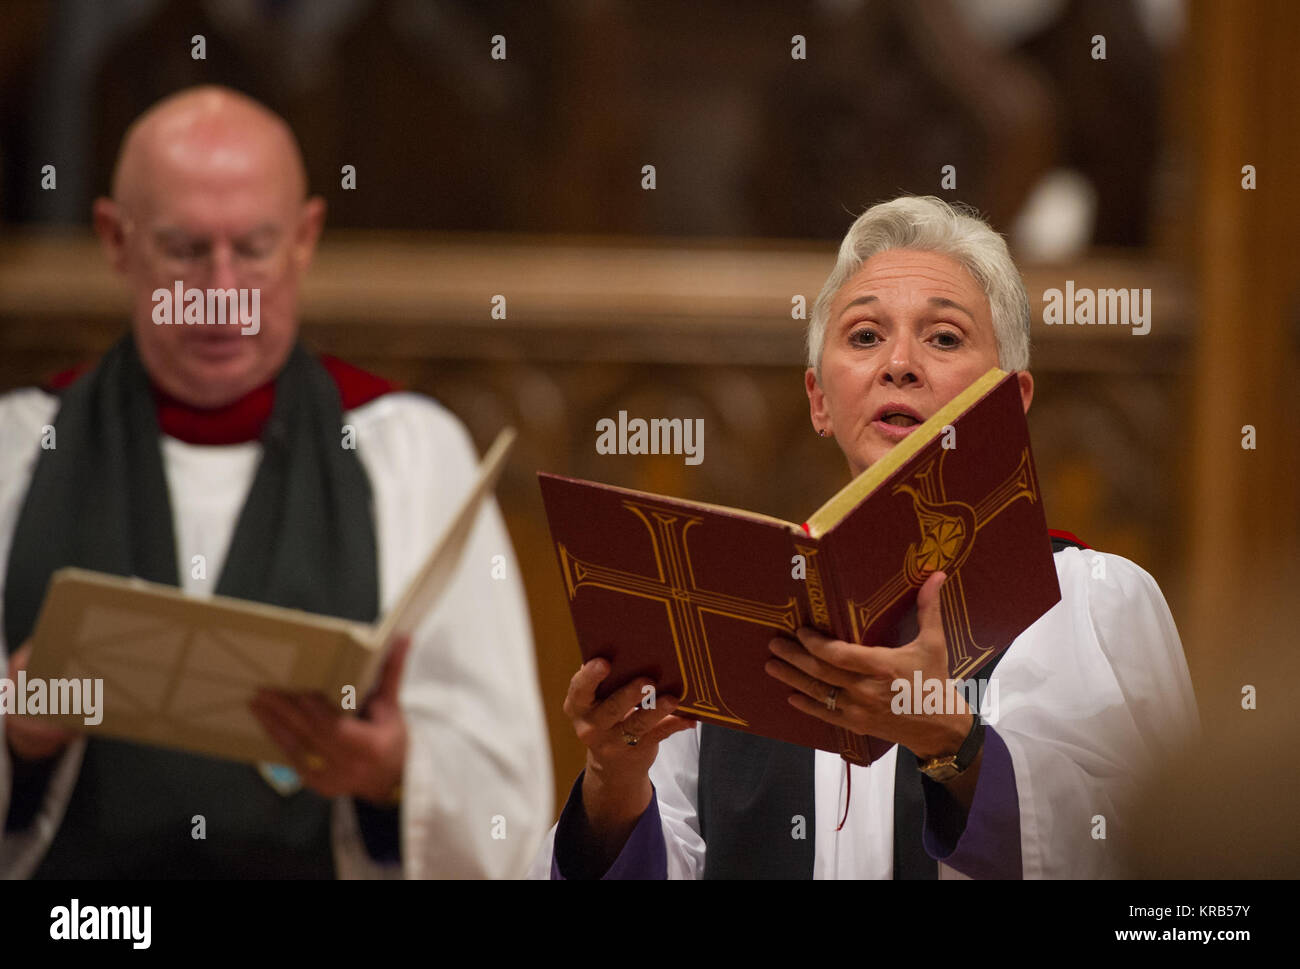 The Rev. Gina Gilland Campbell, acting director of worship, Washington National Cathedral, reads the Gospel during a memorial service celebrating the life of Neil Armstrong at the Washington National Cathedral, Thursday, Sept. 13, 2012. Armstrong, the first man to walk on the moon during the 1969 Apollo 11 mission, died Saturday, Aug. 25. He was 82. Photo Credit: (NASA/Paul E. Alers) Neil Armstrong public memorial service (201209130014HQ) Stock Photo